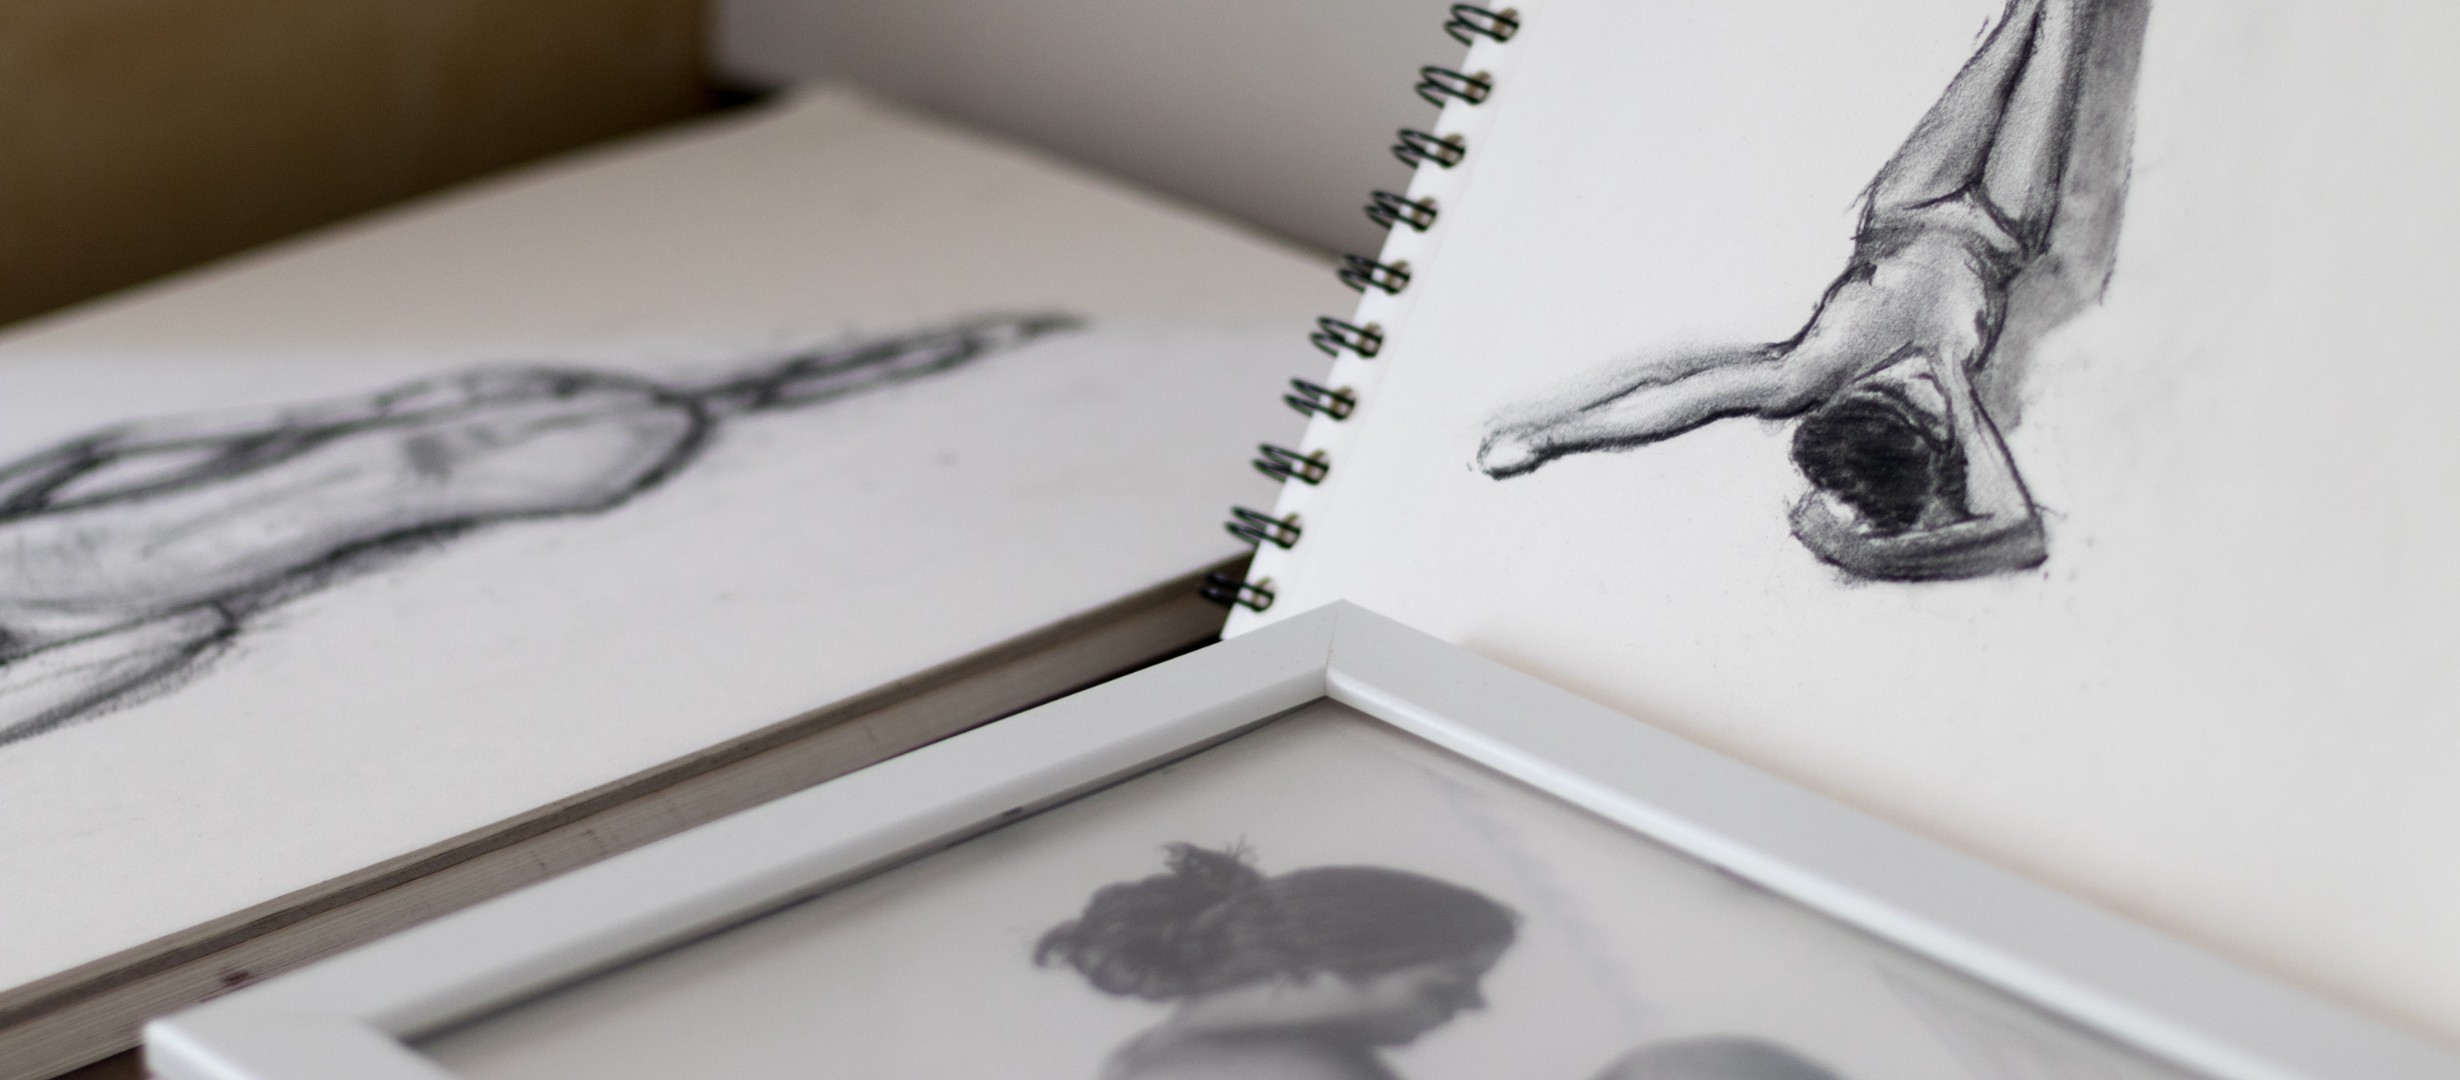 Photograph of sketchbooks with pencil figure drawings in